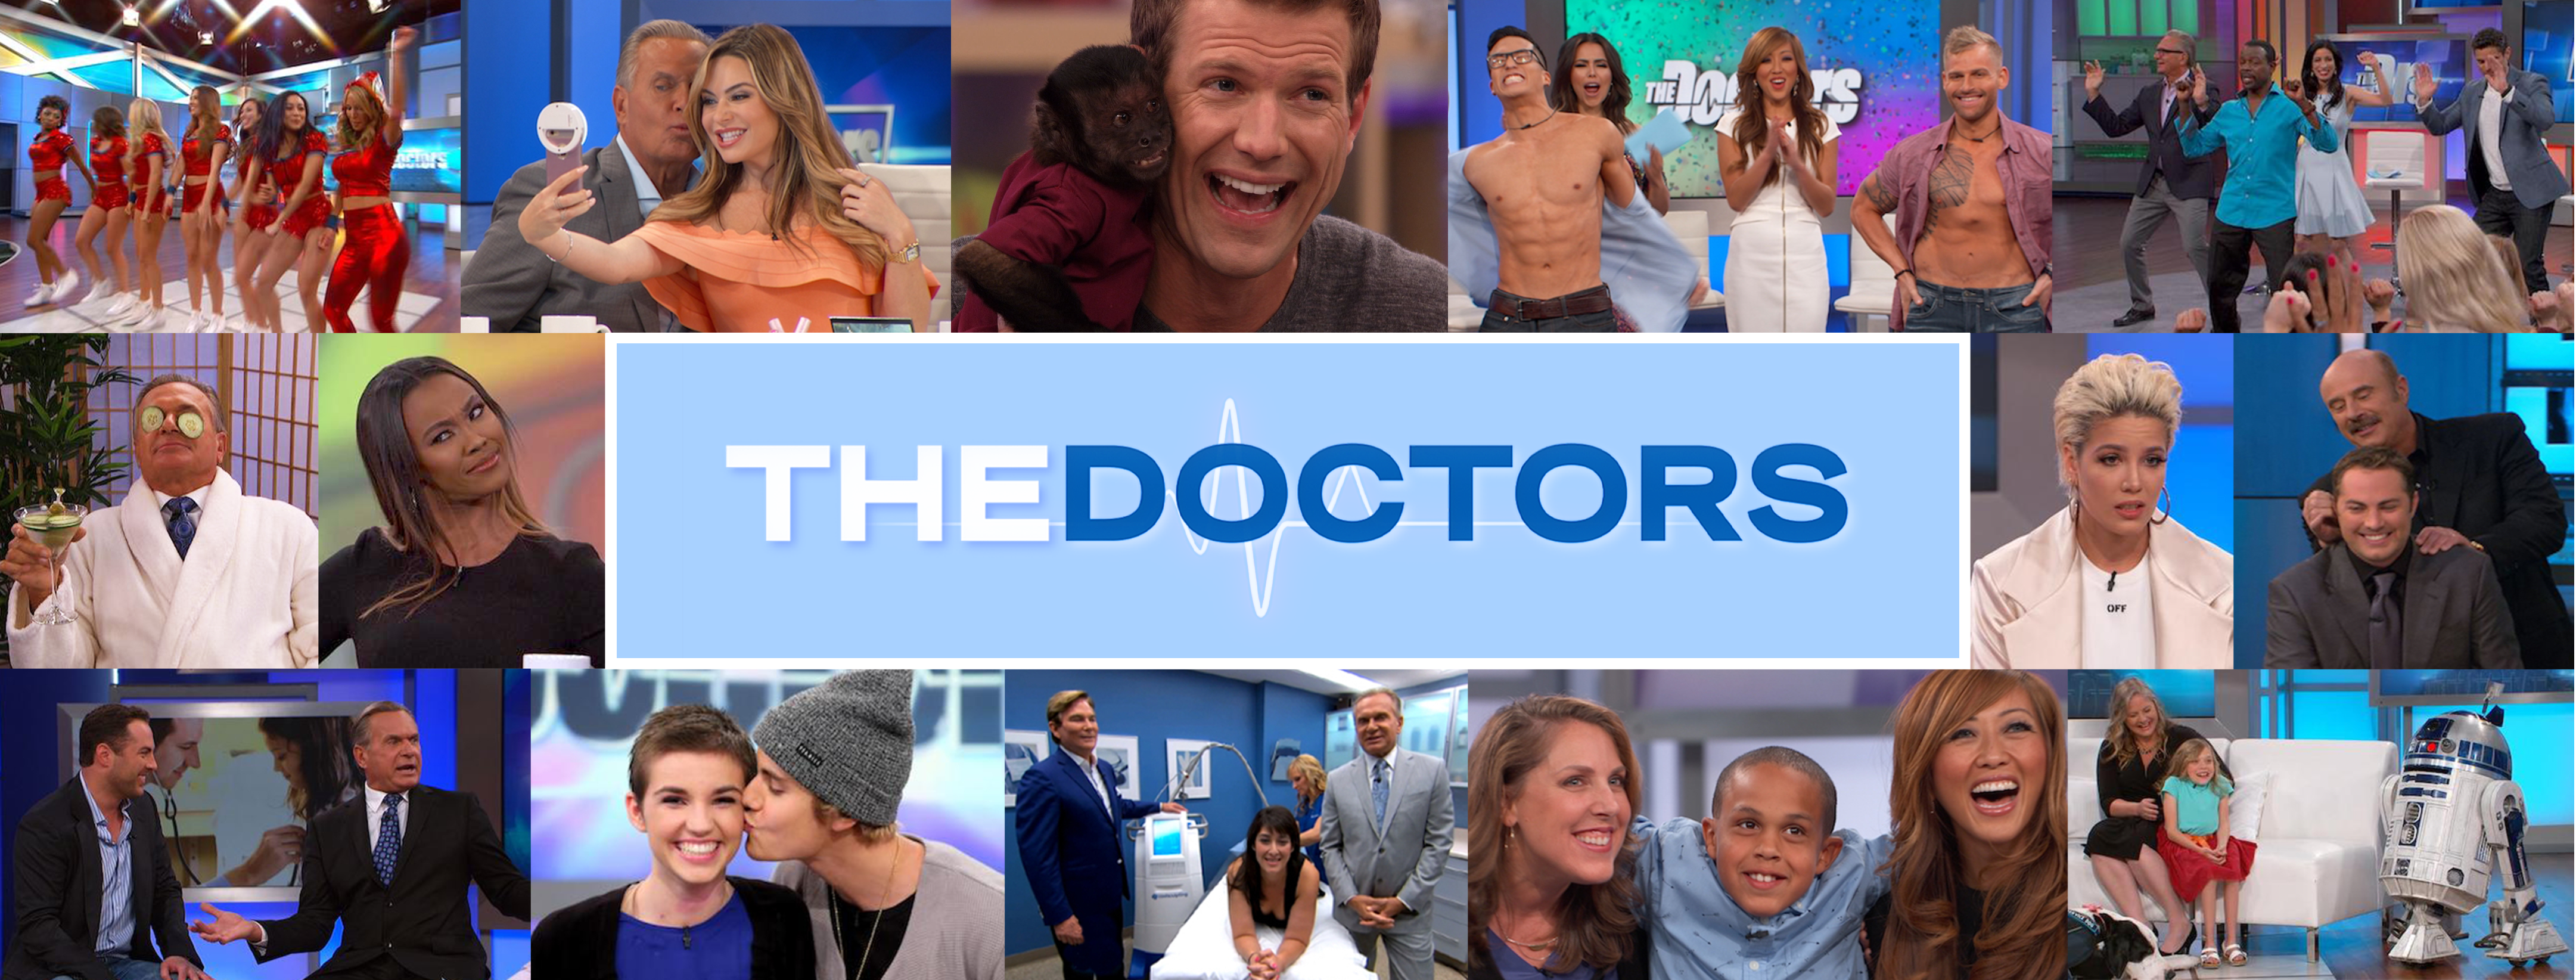 Top F Words Everyone Fears The Doctors Tv Show